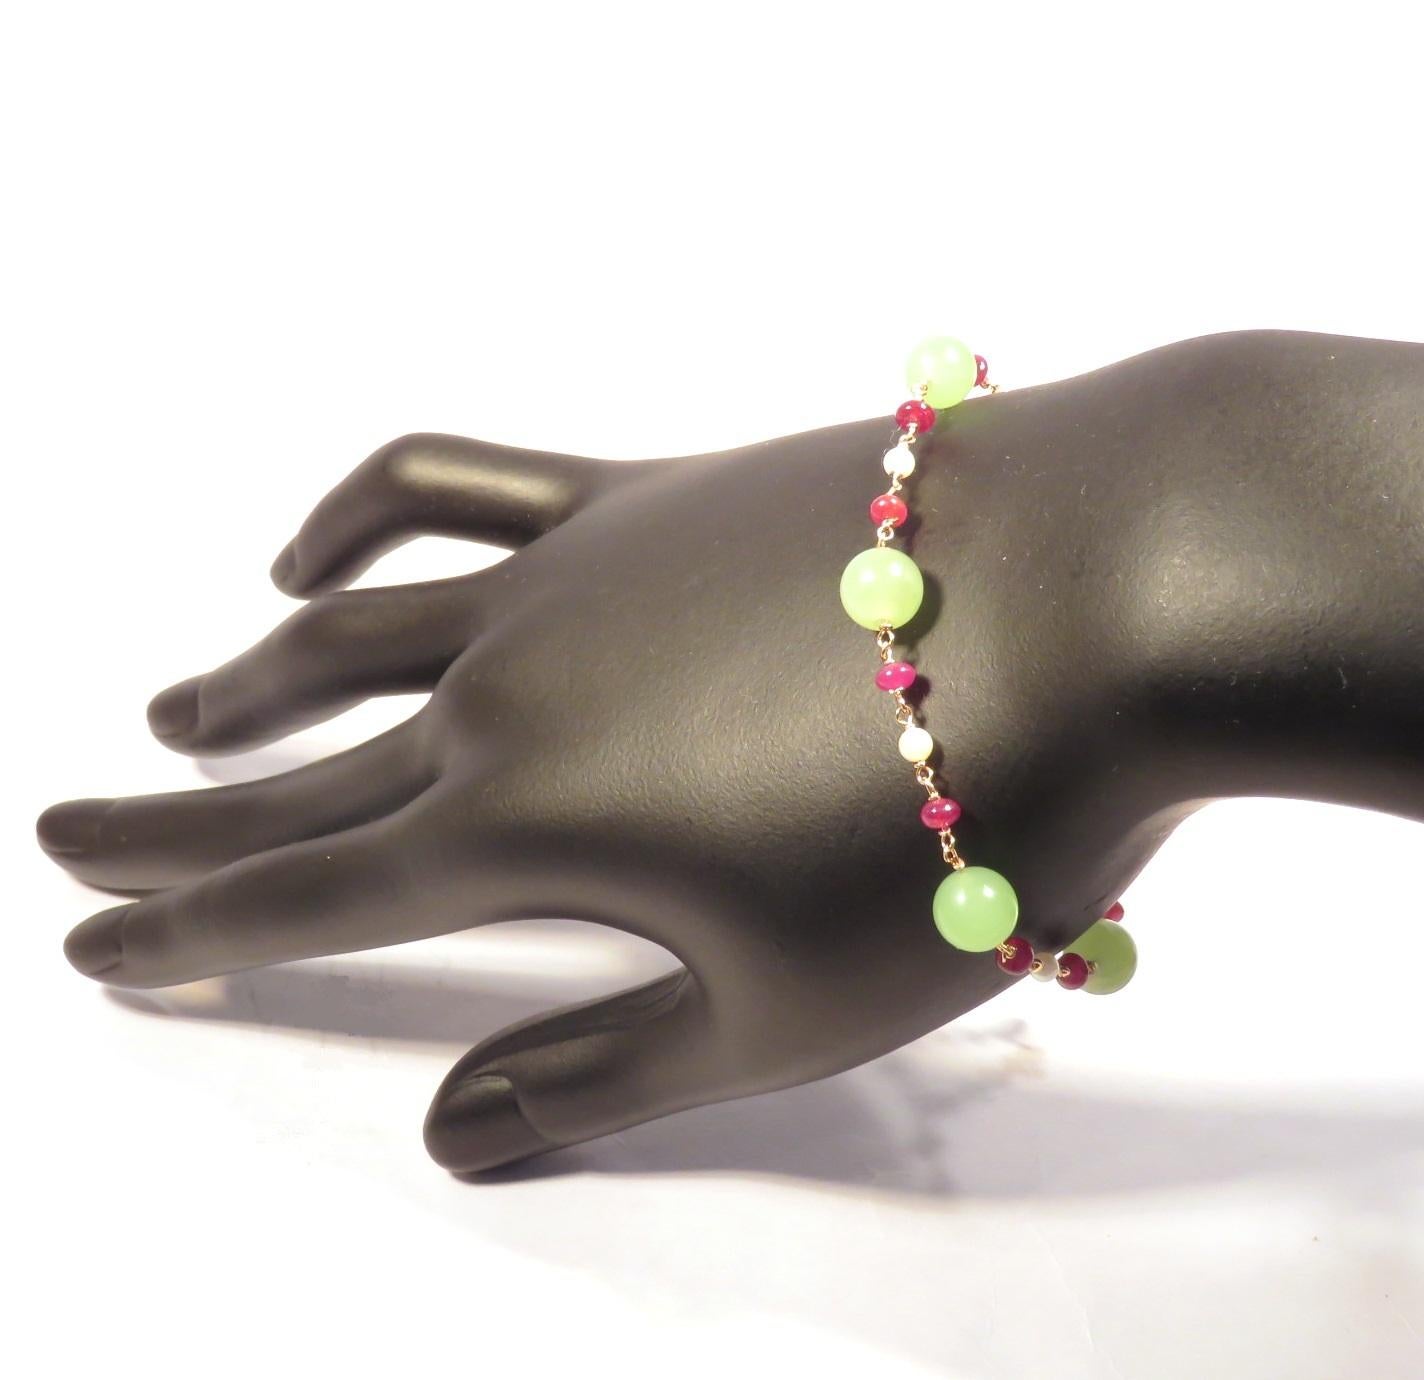 Bracelet crafted in 9 karat rose gold with 5 natural green jade beads, natural rubies and white frashwater pearls. The bracelet is adjustable from 180 mm to 200 mm / from 7.086 inches to 7.874 inches, it is possible to lengthen the bracelet on